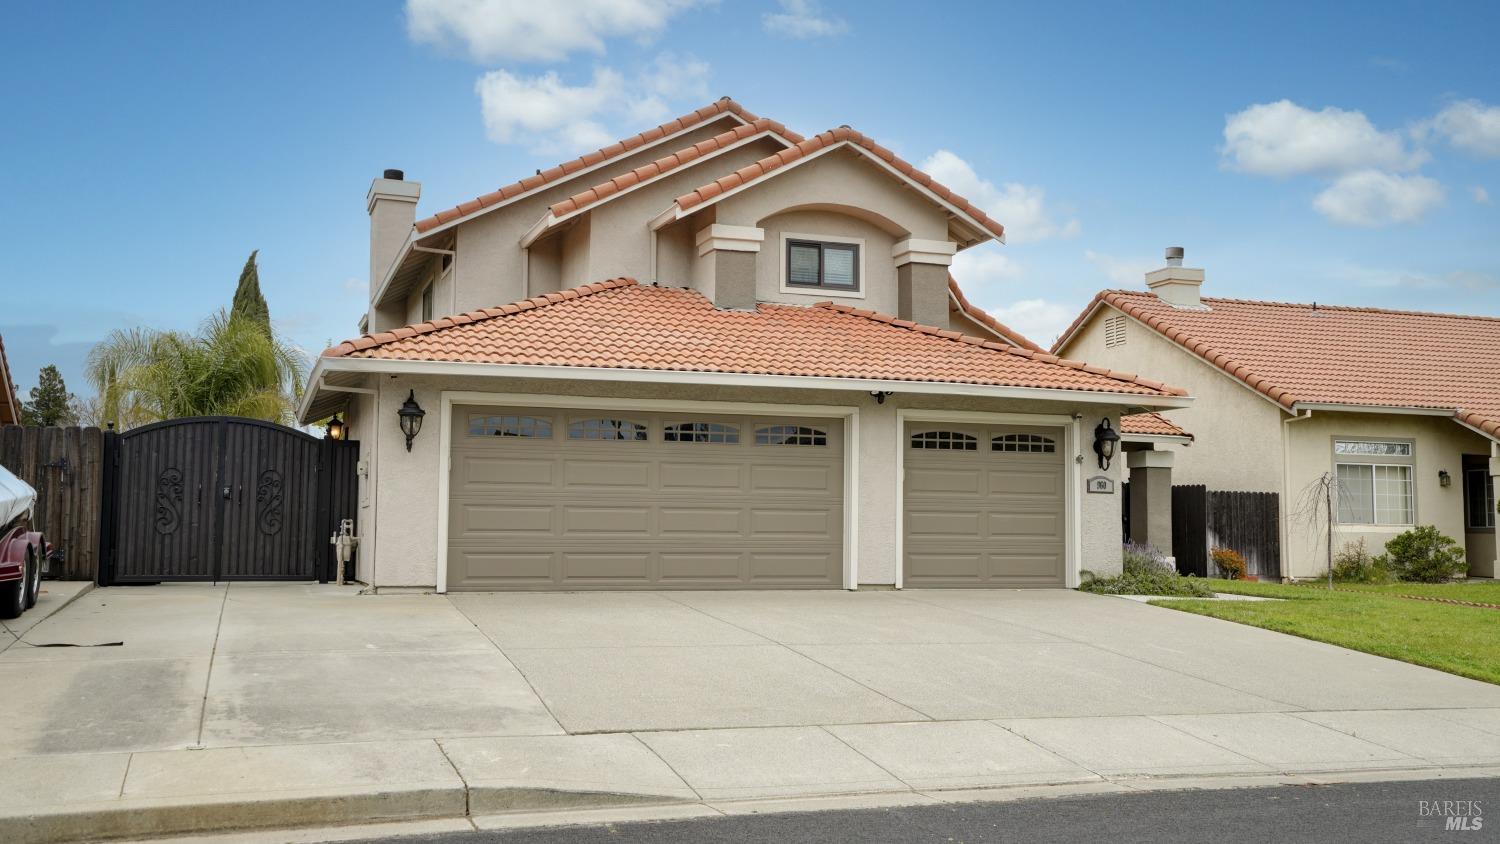 Photo of 960 Iron Dr in Vacaville, CA